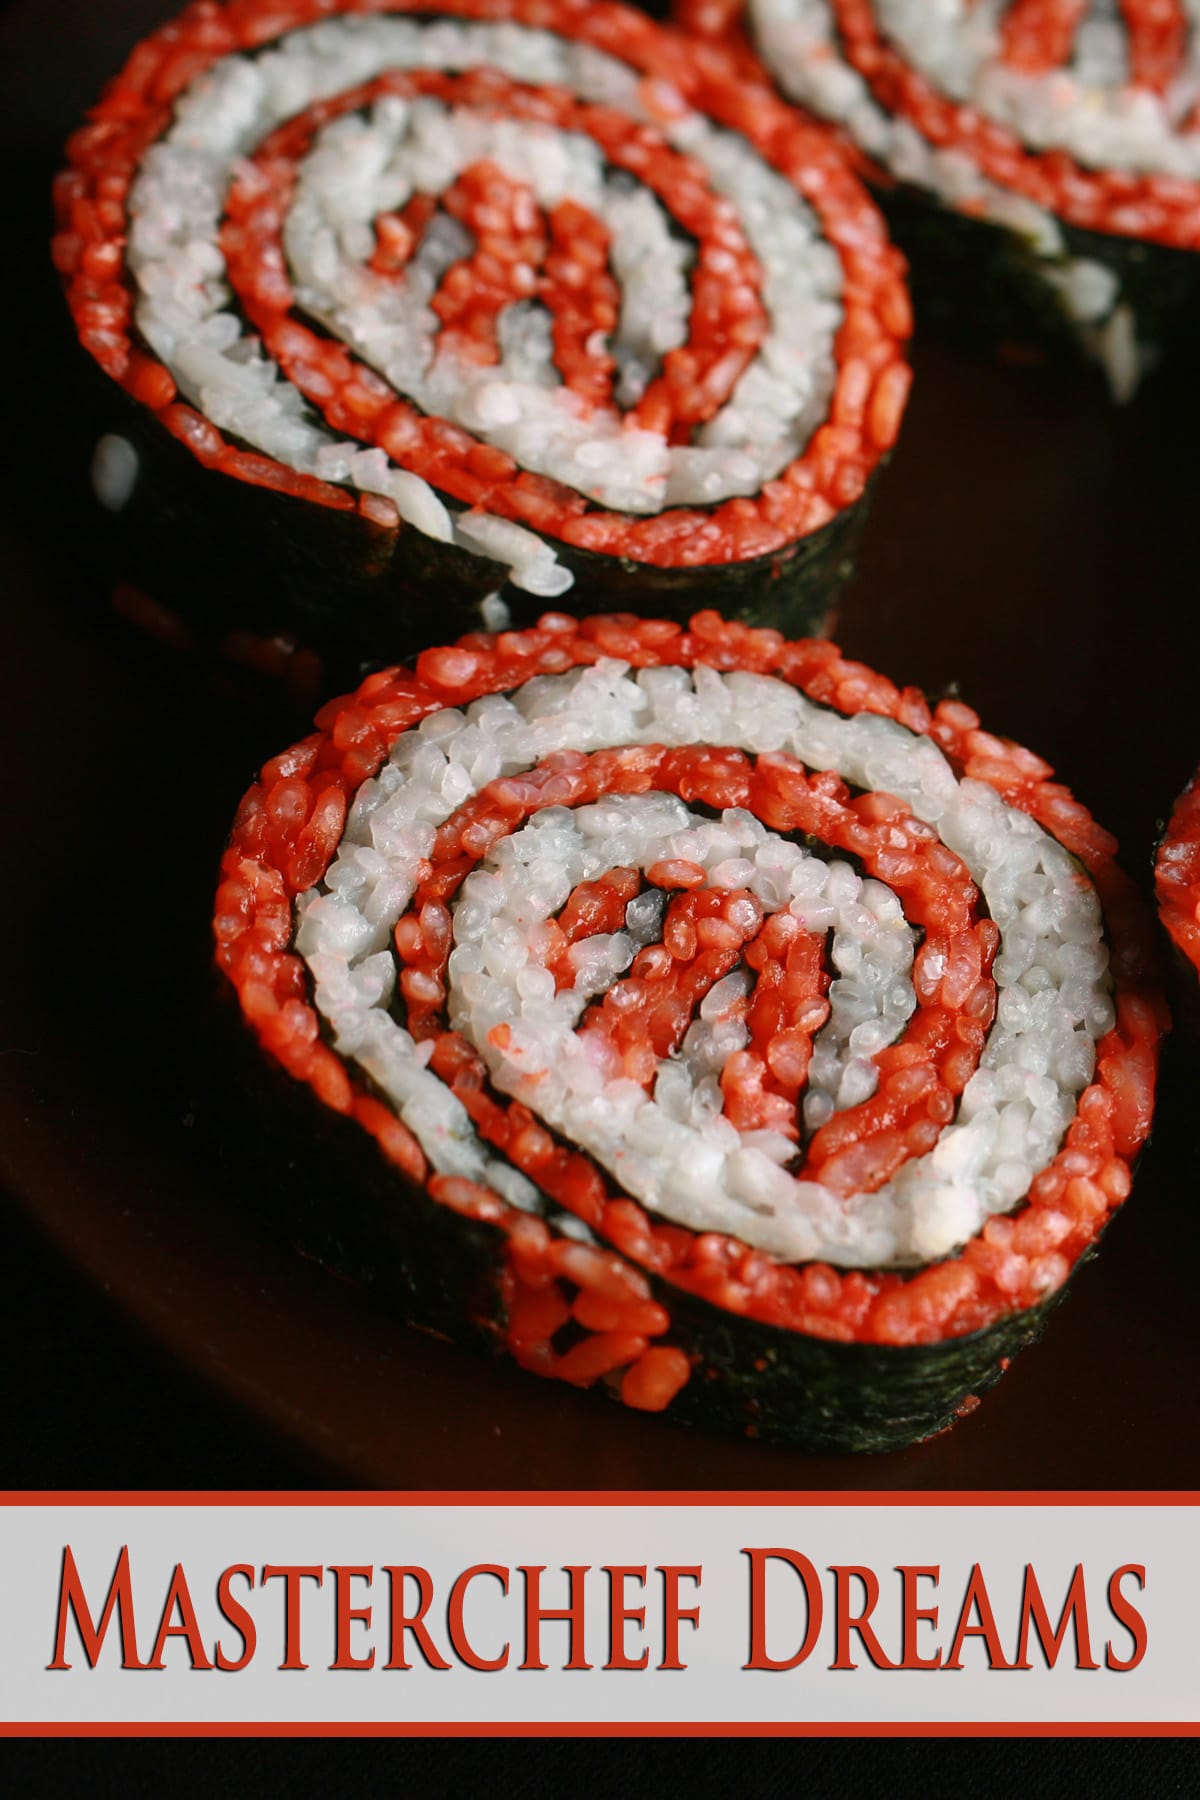 A close up view of a plate of sushi shaped to look like the Masterchef logo.